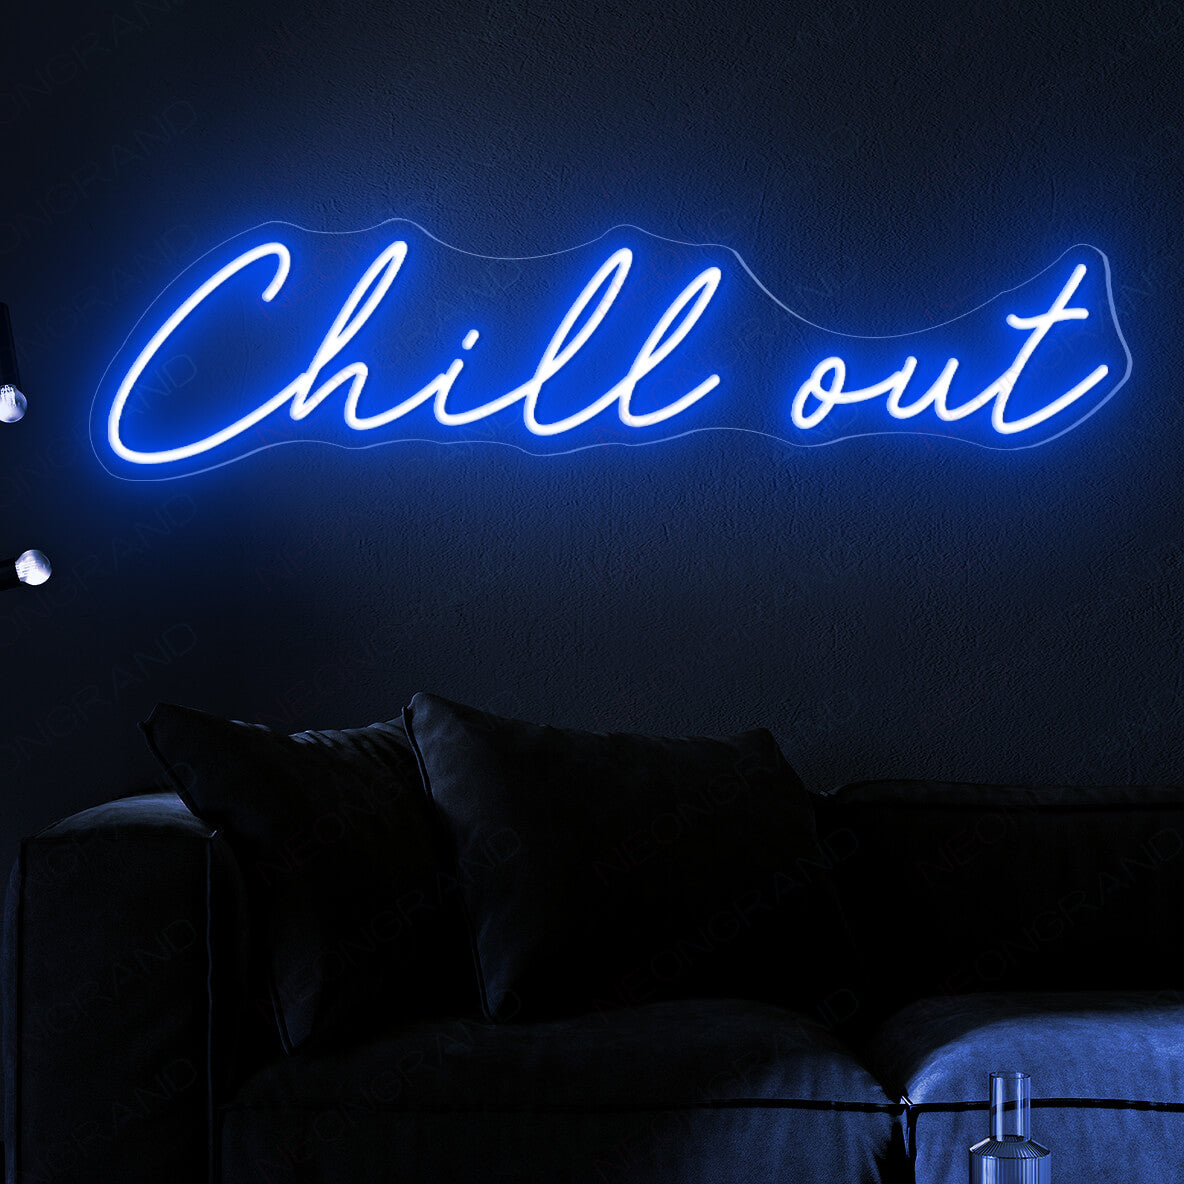 Chill Out Neon Sign Led Light blue